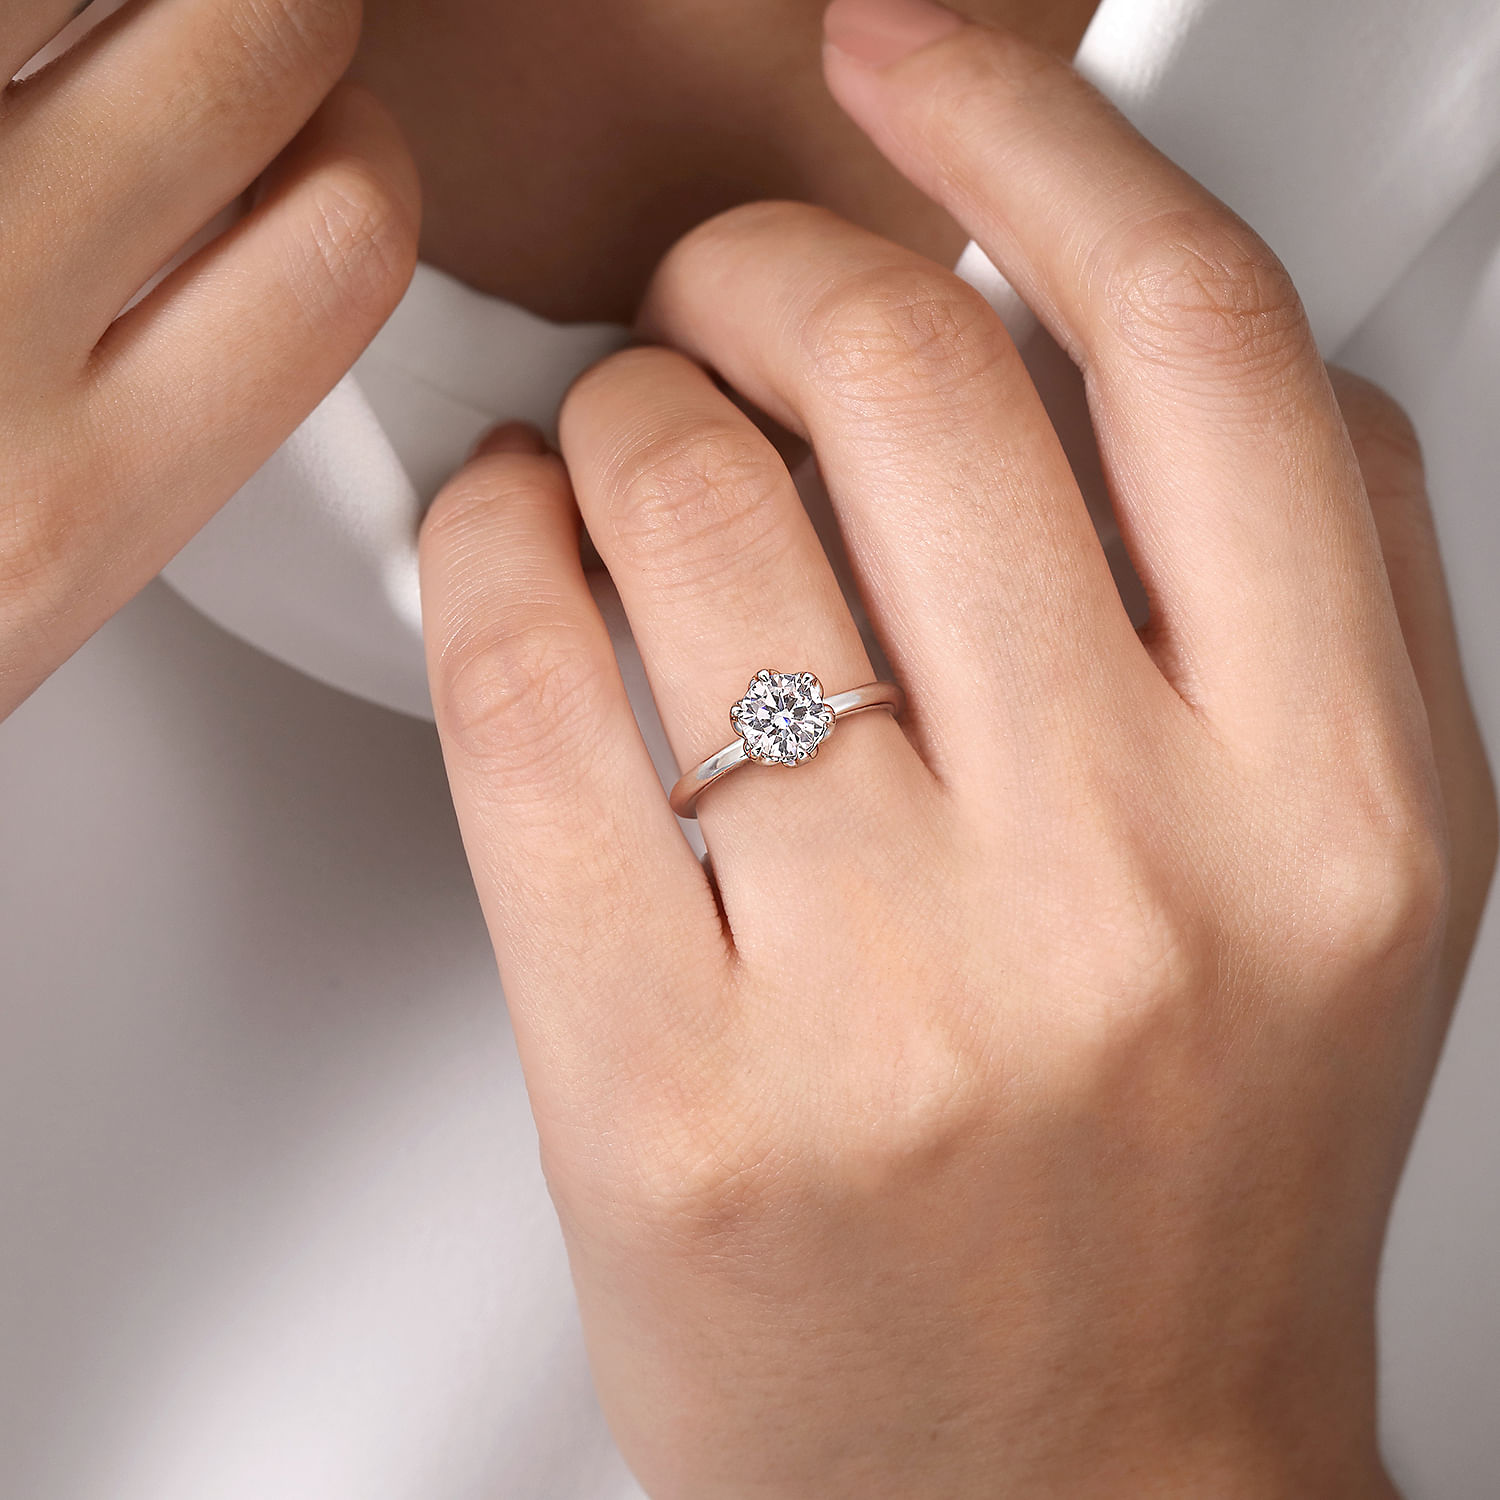 14K White Gold Round Solitaire
Engagement Ring